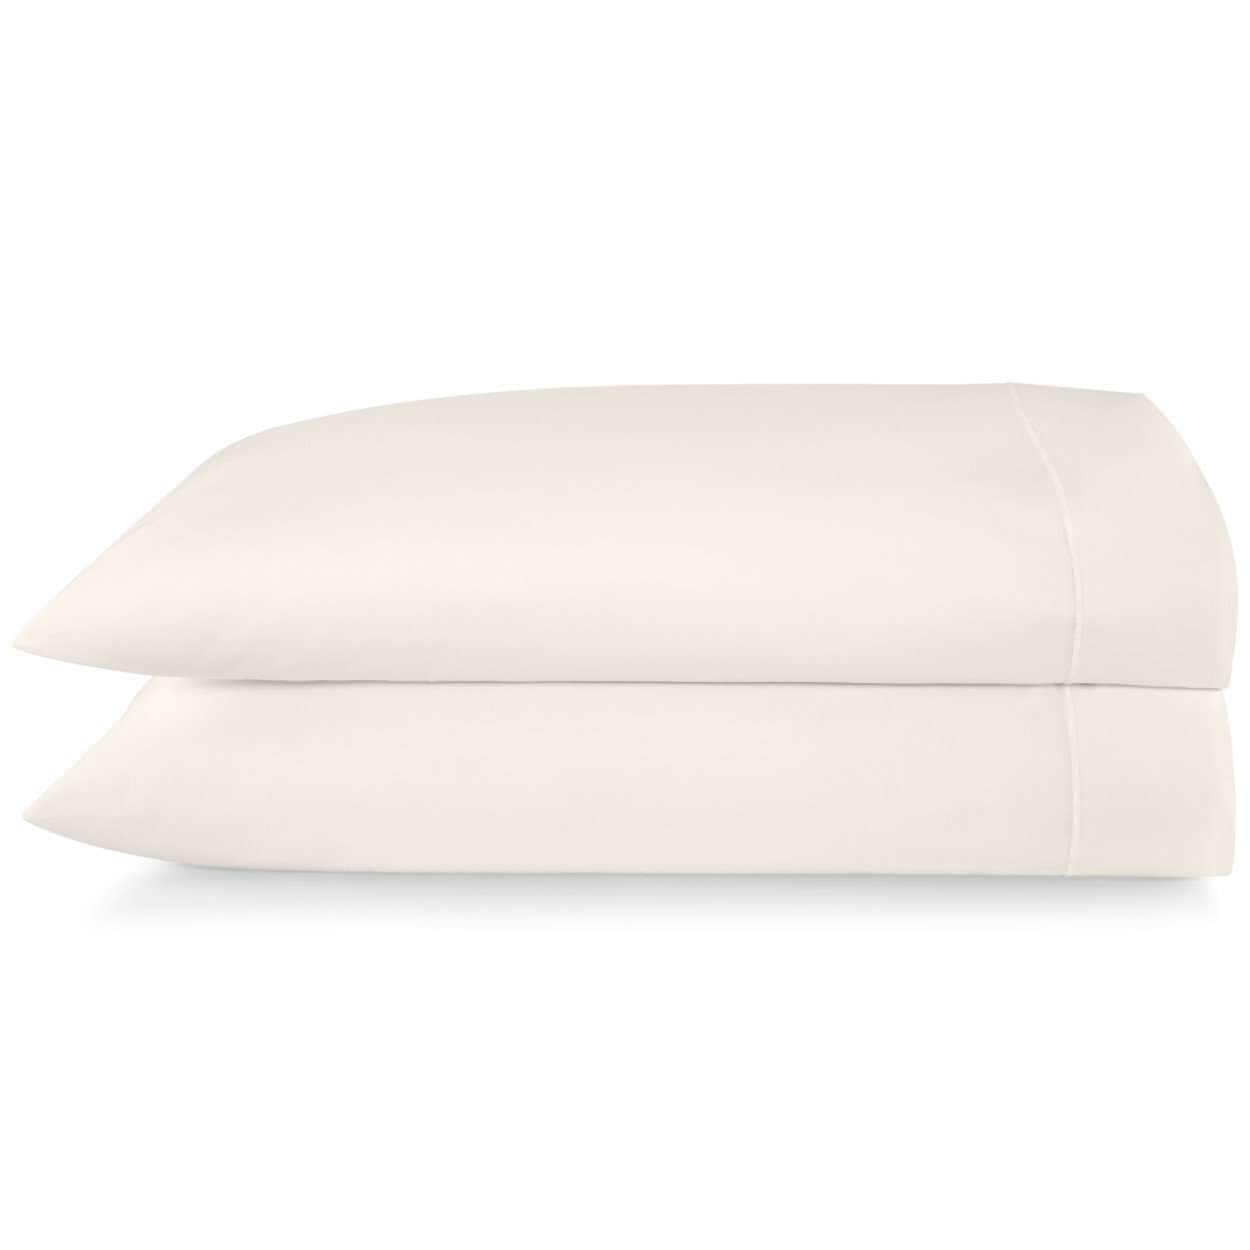 Sheets Soprano Pillowcase Pair by Peacock Alley Standard 20x30 / Ivory Peacock Alley